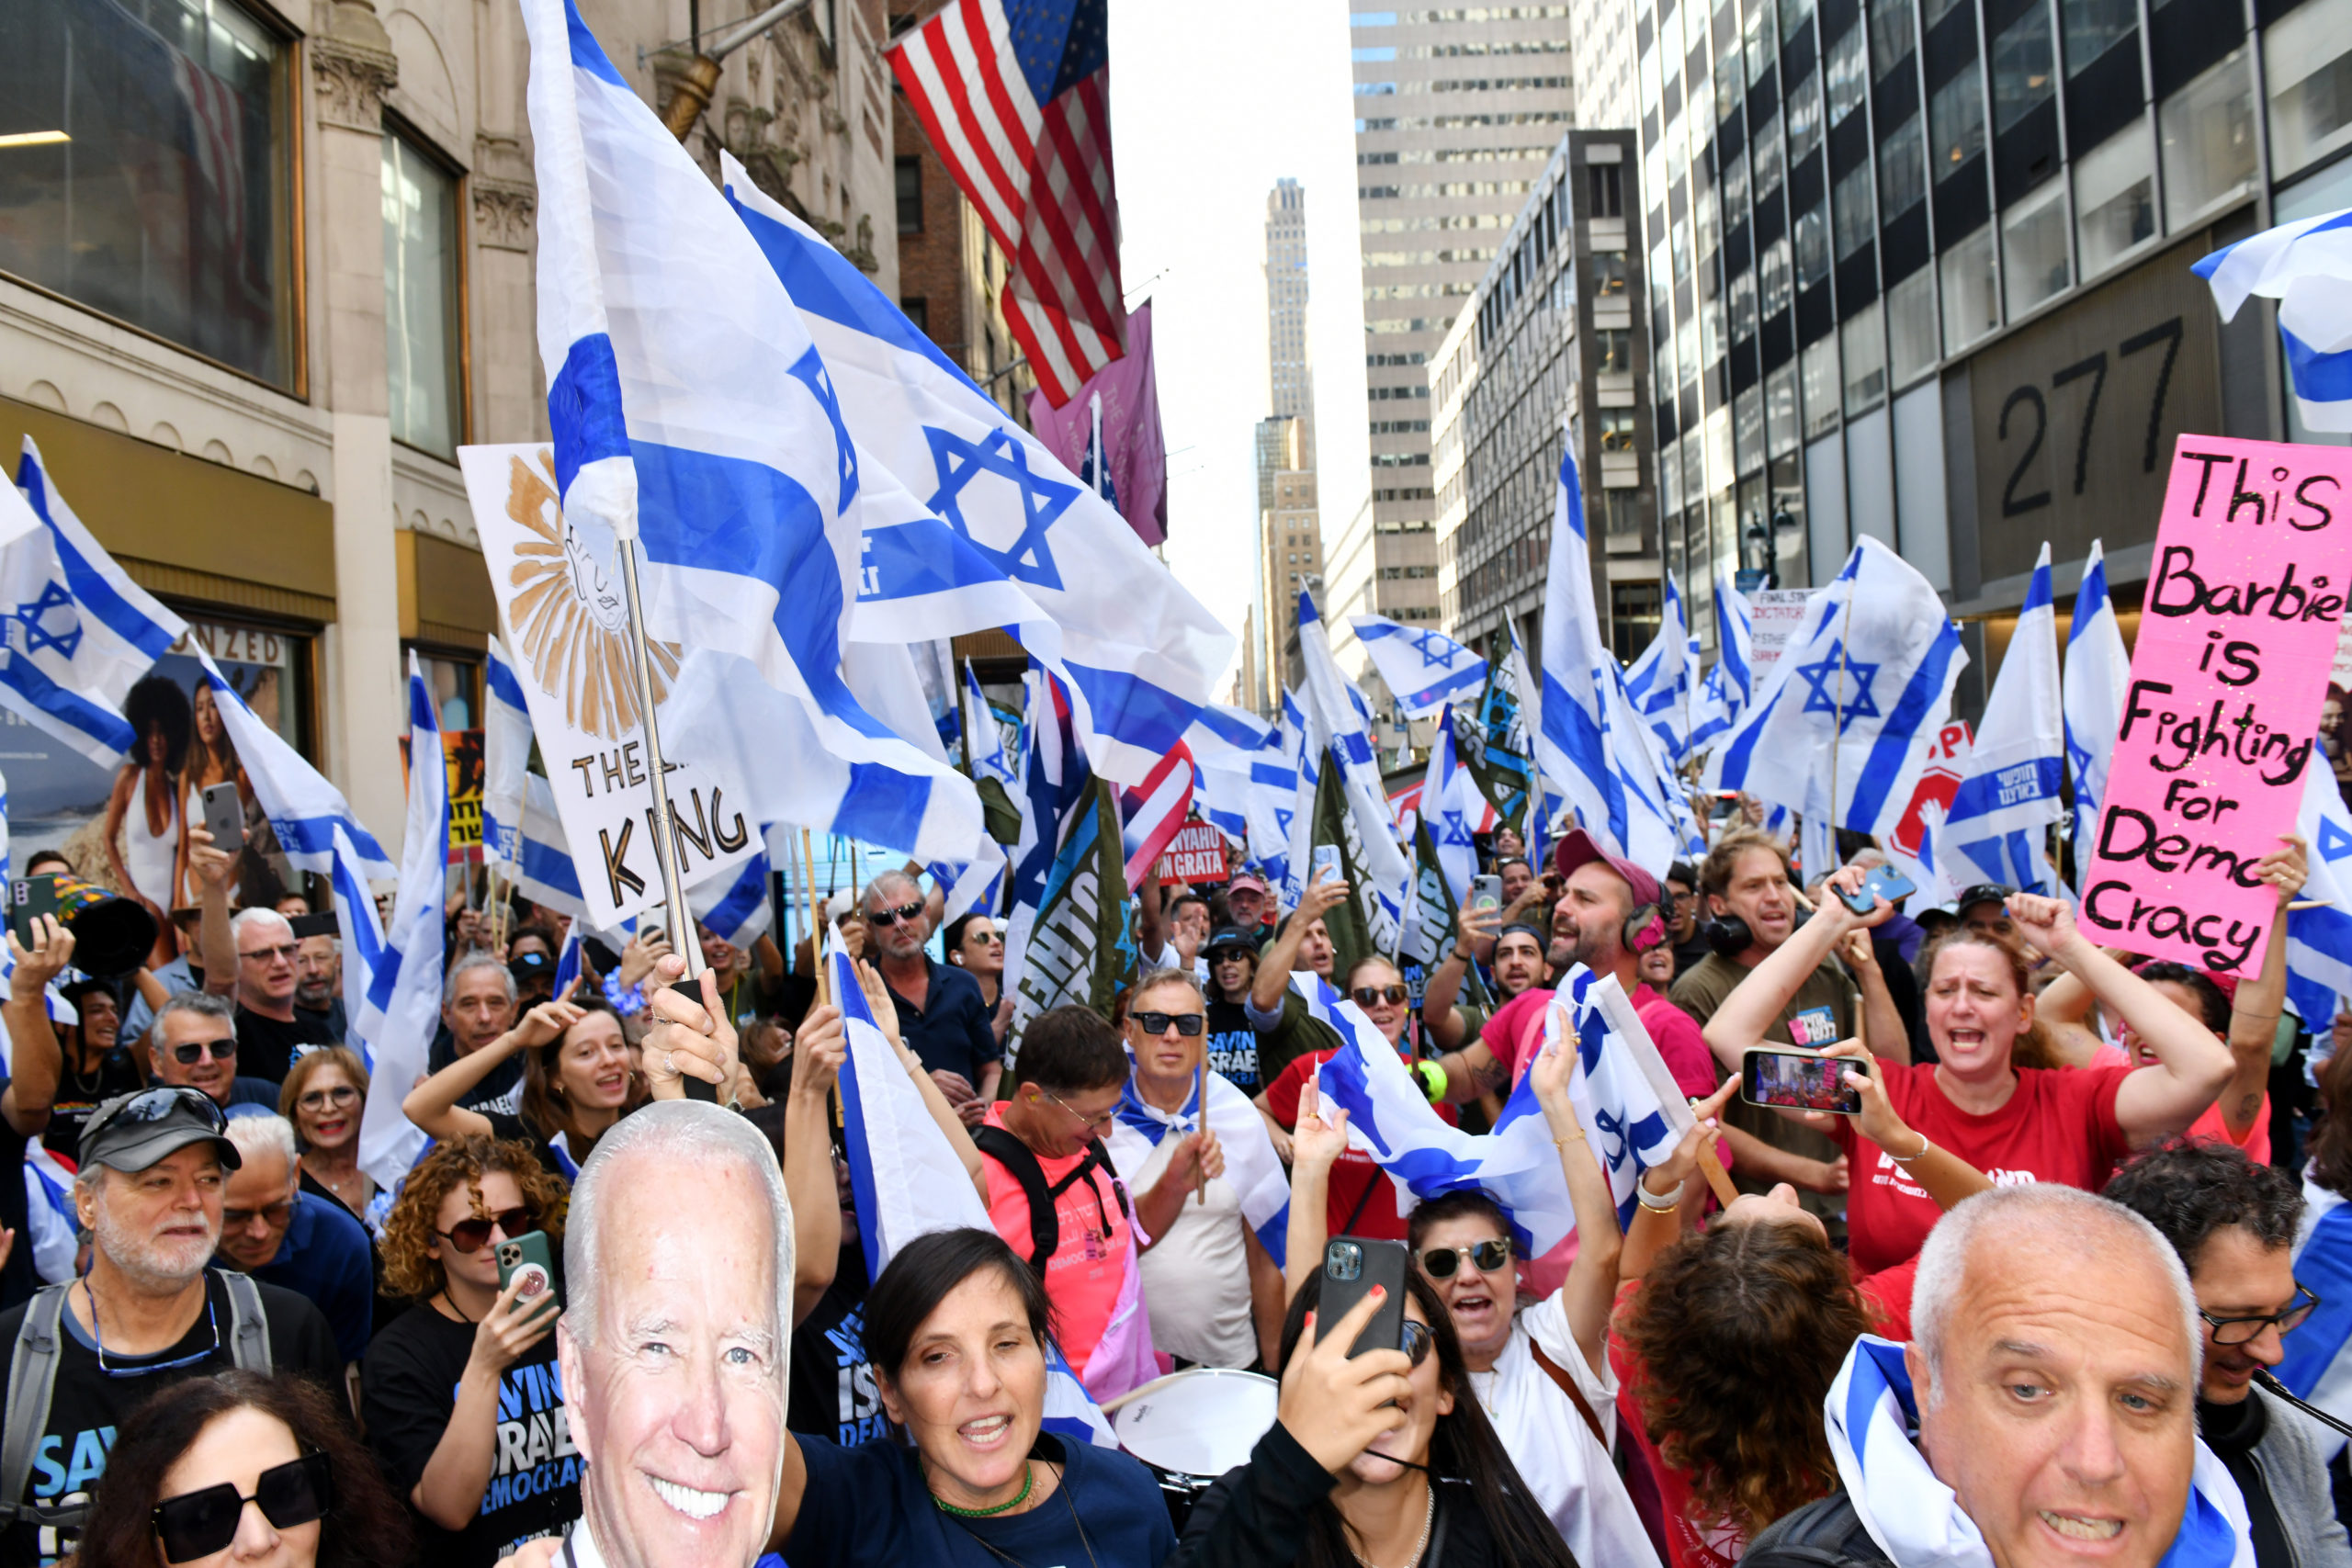  attends The New York Protest Movement as they welcome Prime Minister Netanyahu to his meeting with President Biden by demanding Democracy and yelling "Shame!" on September 20, 2023 in New York City. (Photo by Craig Barritt/Getty Images for New York Protest Movement)